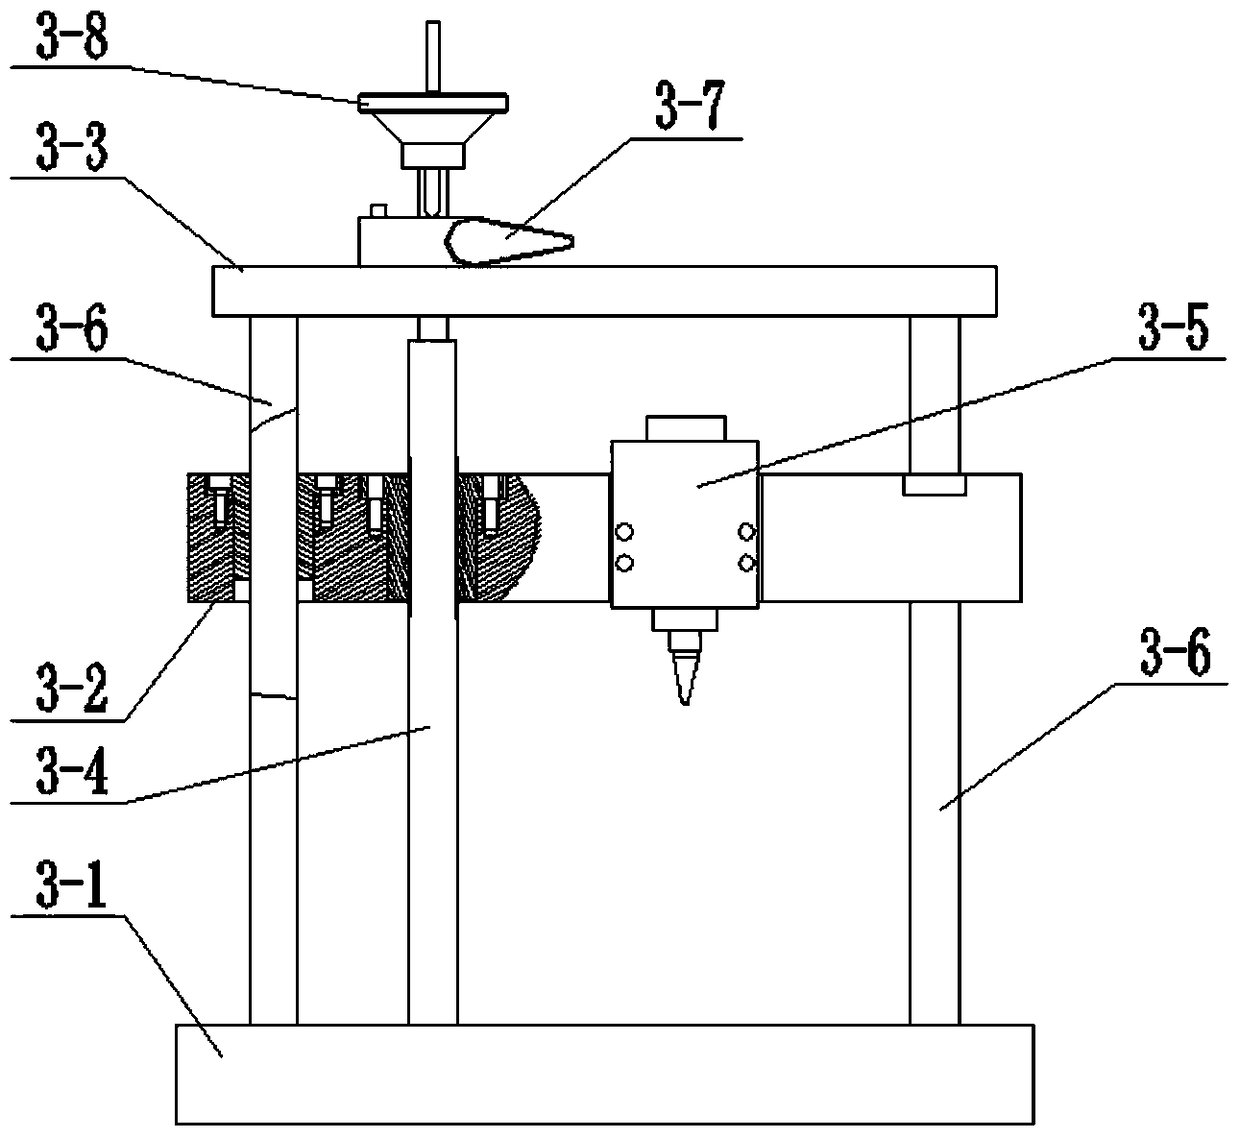 A high-speed vibration measurement device for rolling bearings